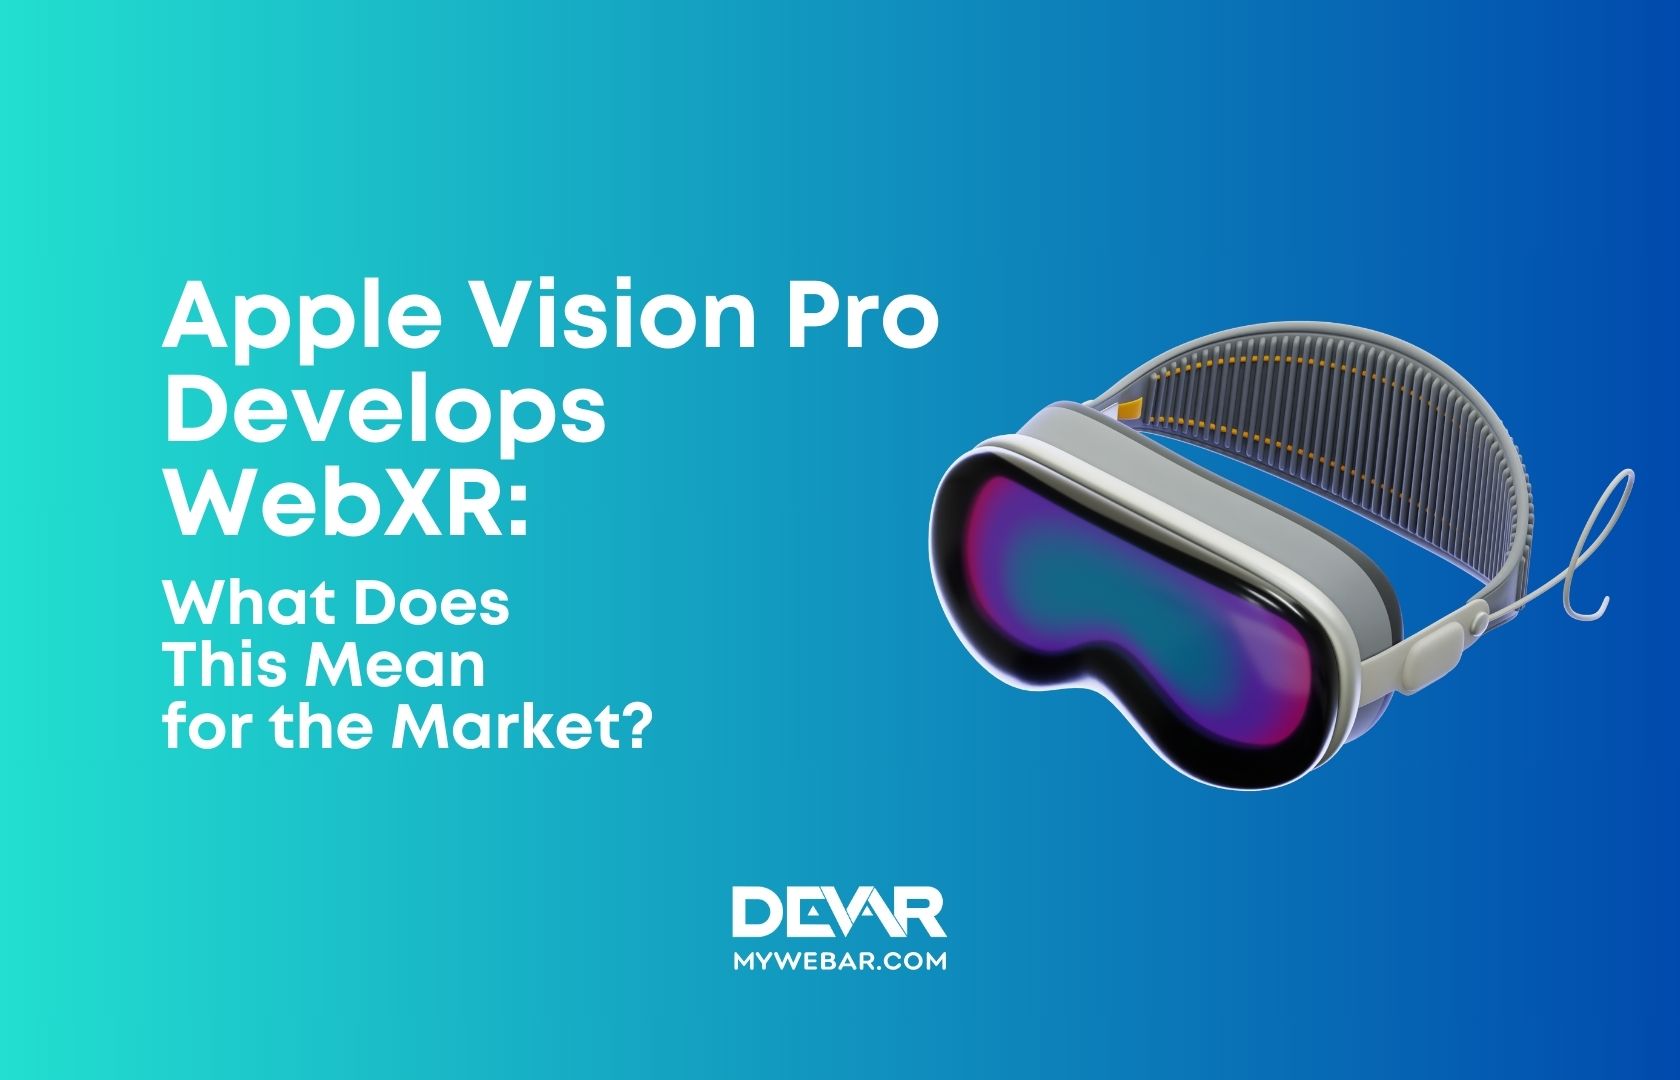 Apple Vision Pro Develops WebXR: What Does This Mean for the Market?